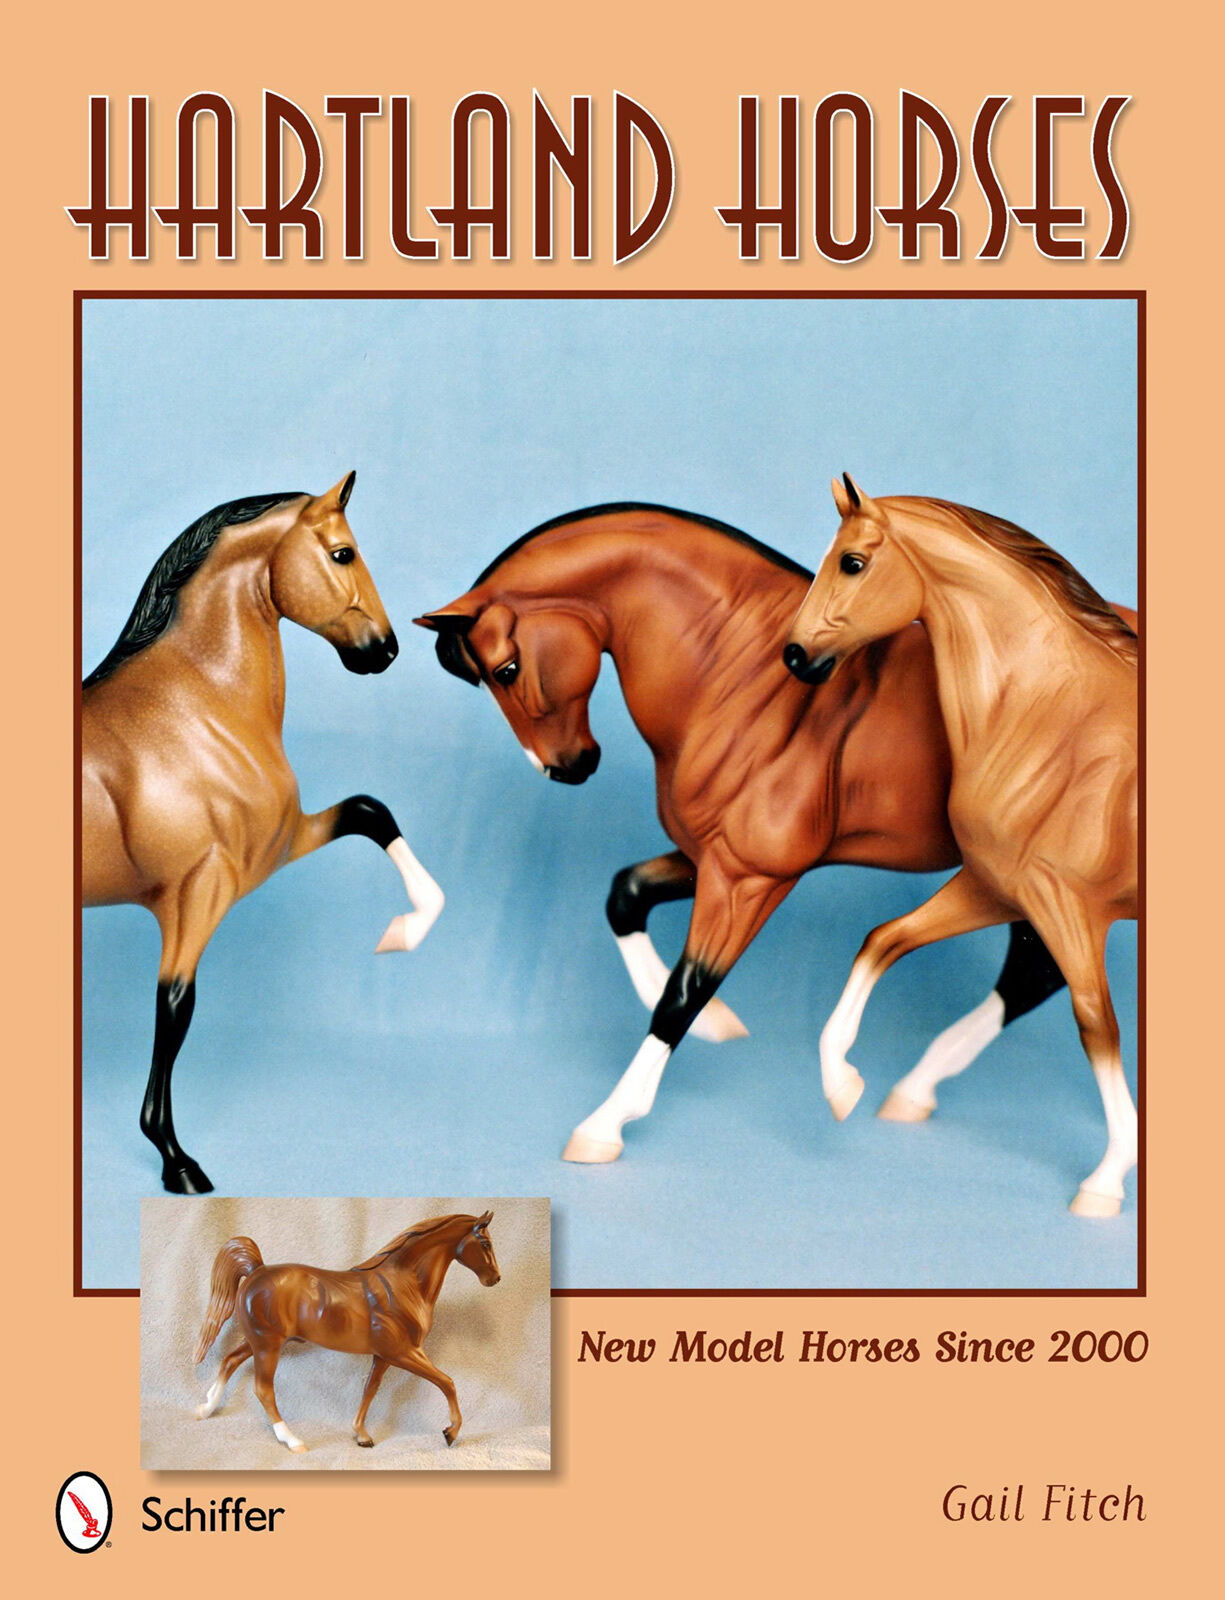 Hartland Horse guide book 2000-12 lovely plastic model horses 500+ color photos